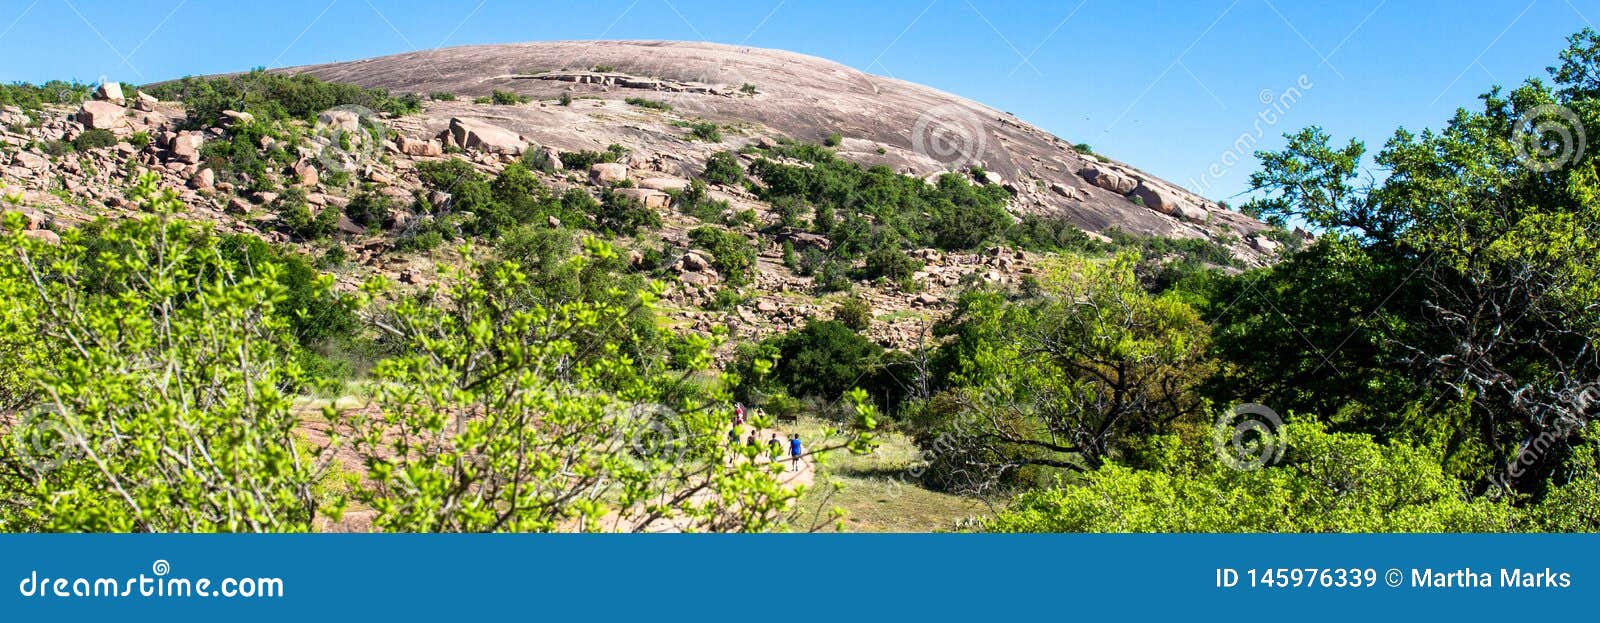 hikers at enchanted rock state natural area in texas